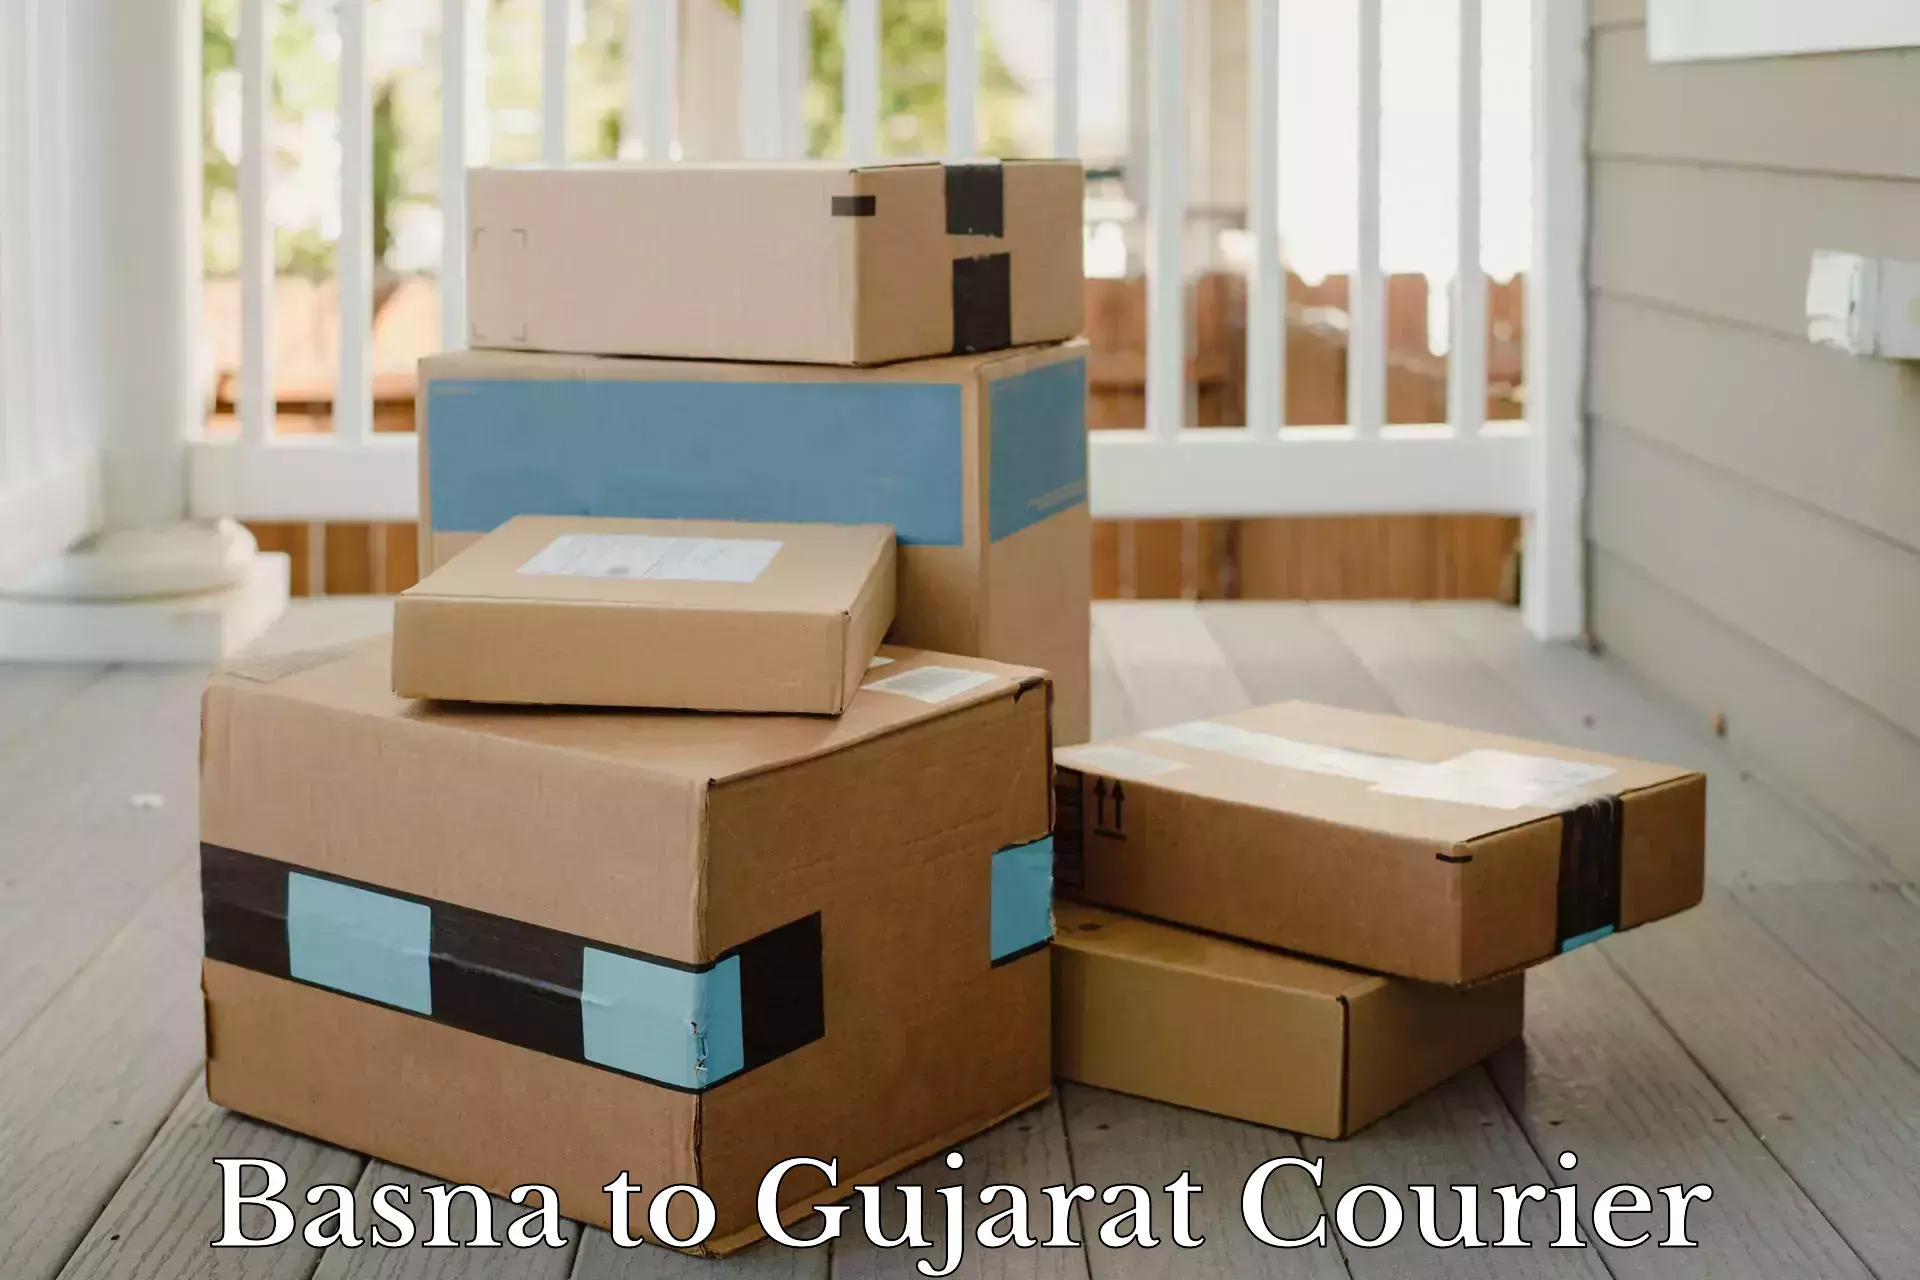 Reliable courier service Basna to Patan Gujarat